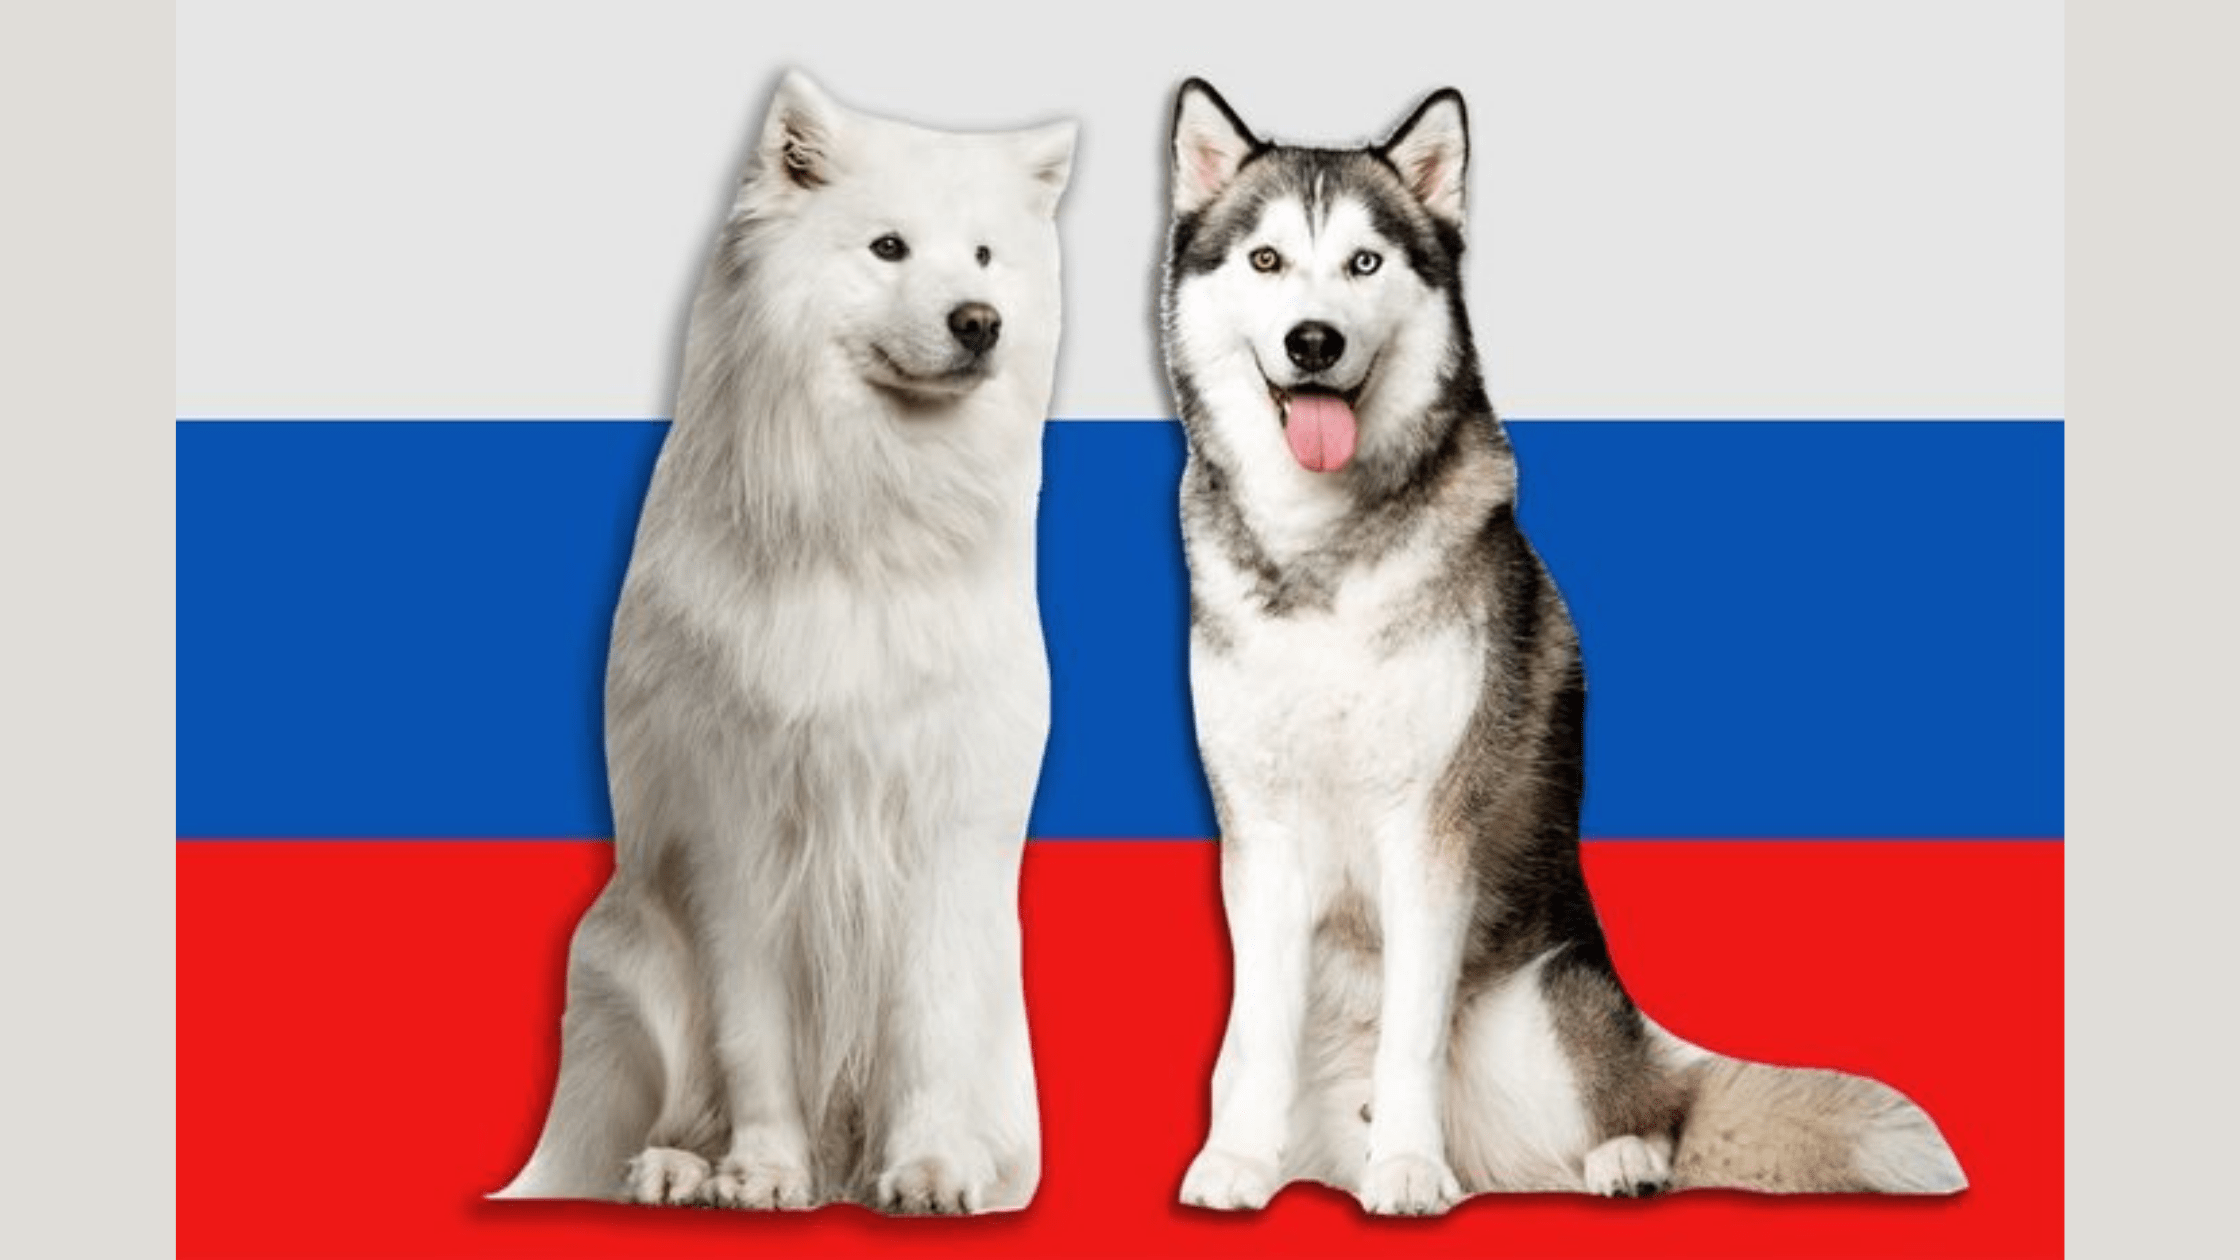 Know about 5 Stately Russian Dog Breeds